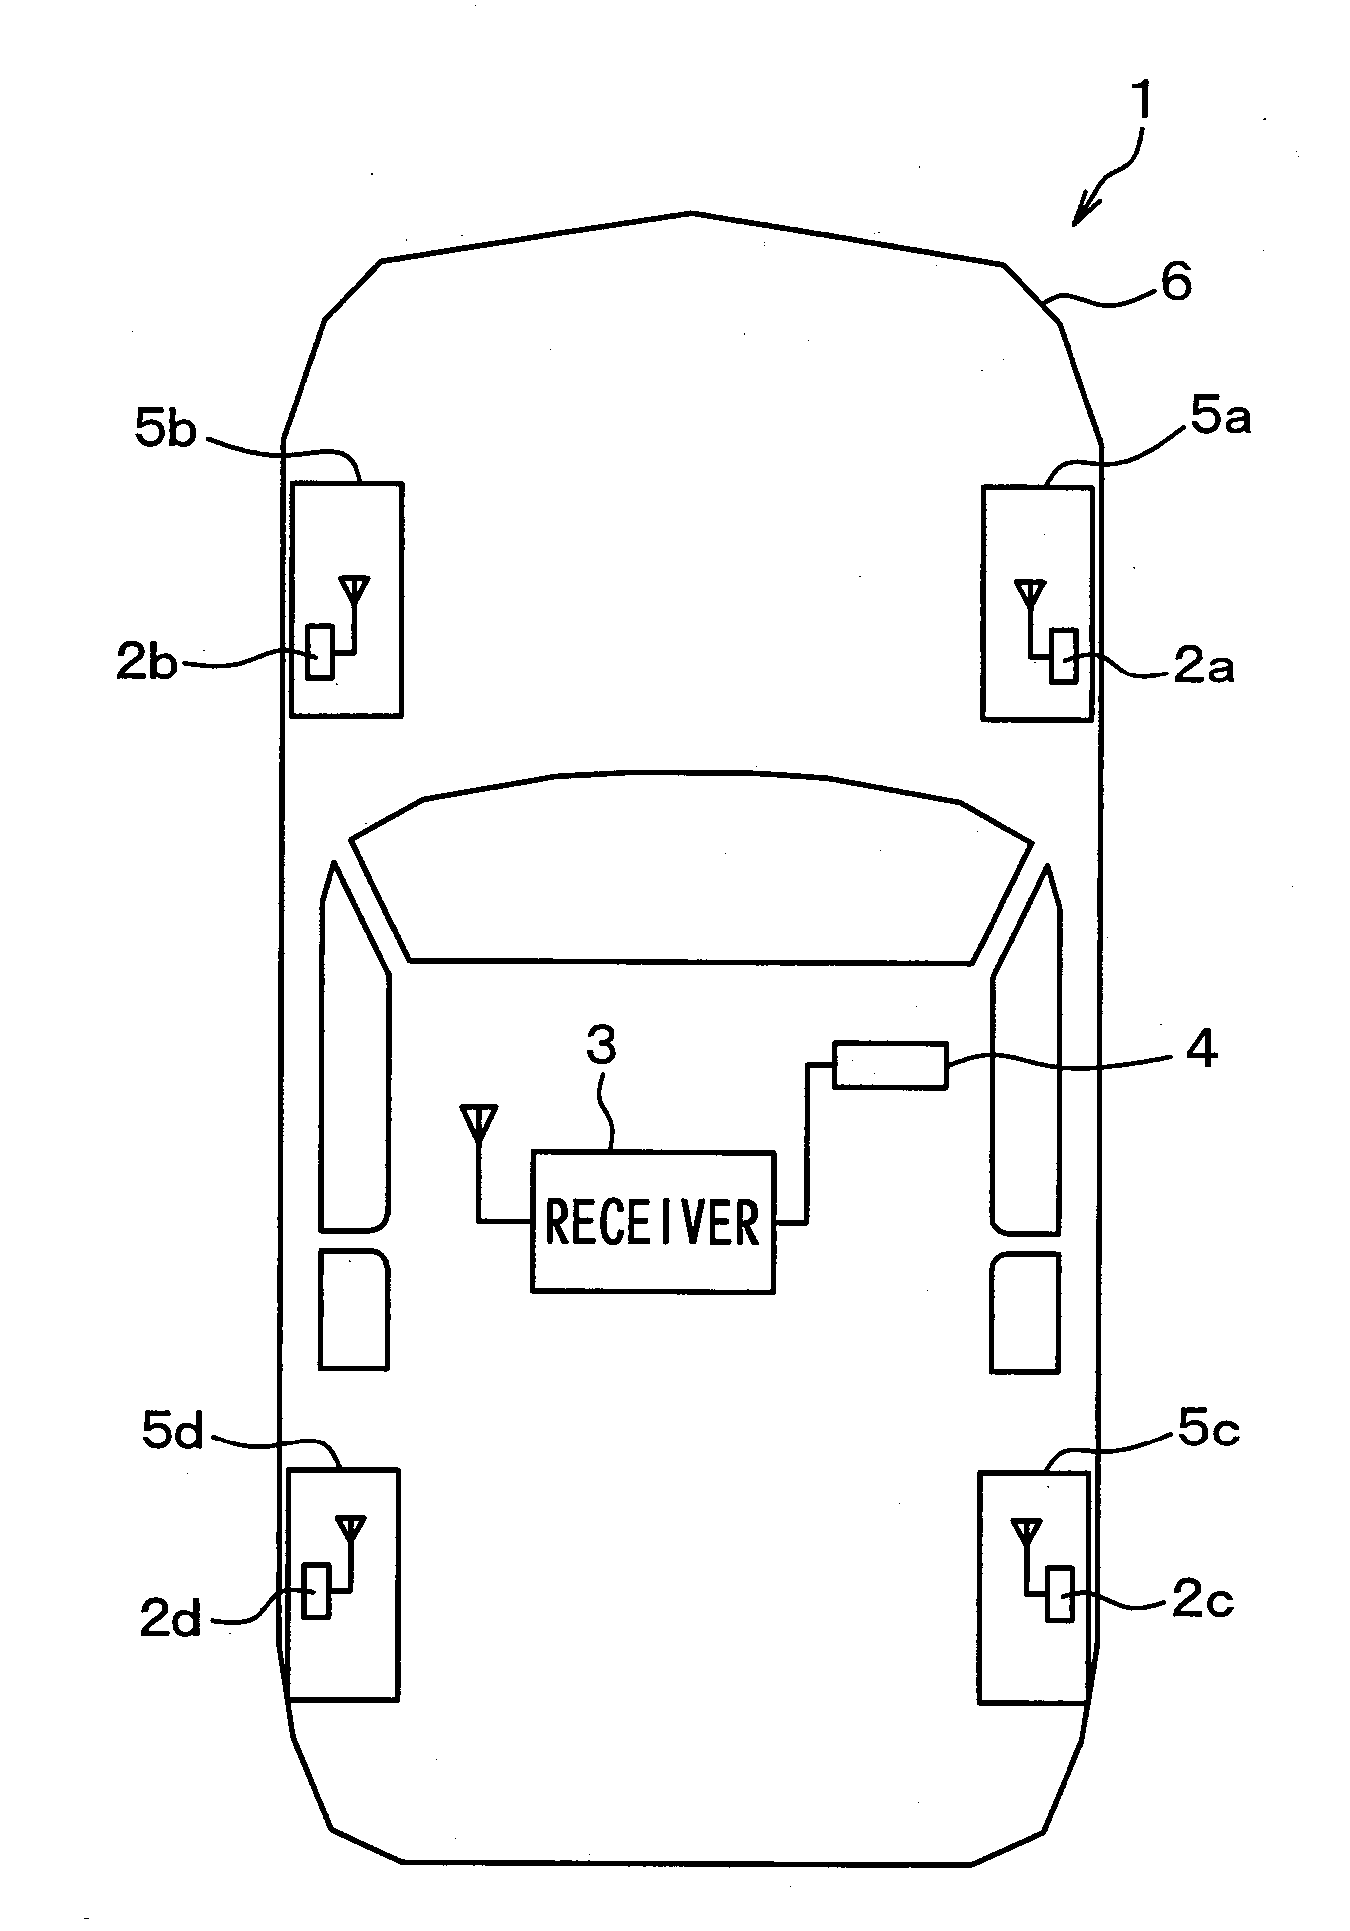 Tire inflation pressure detection device